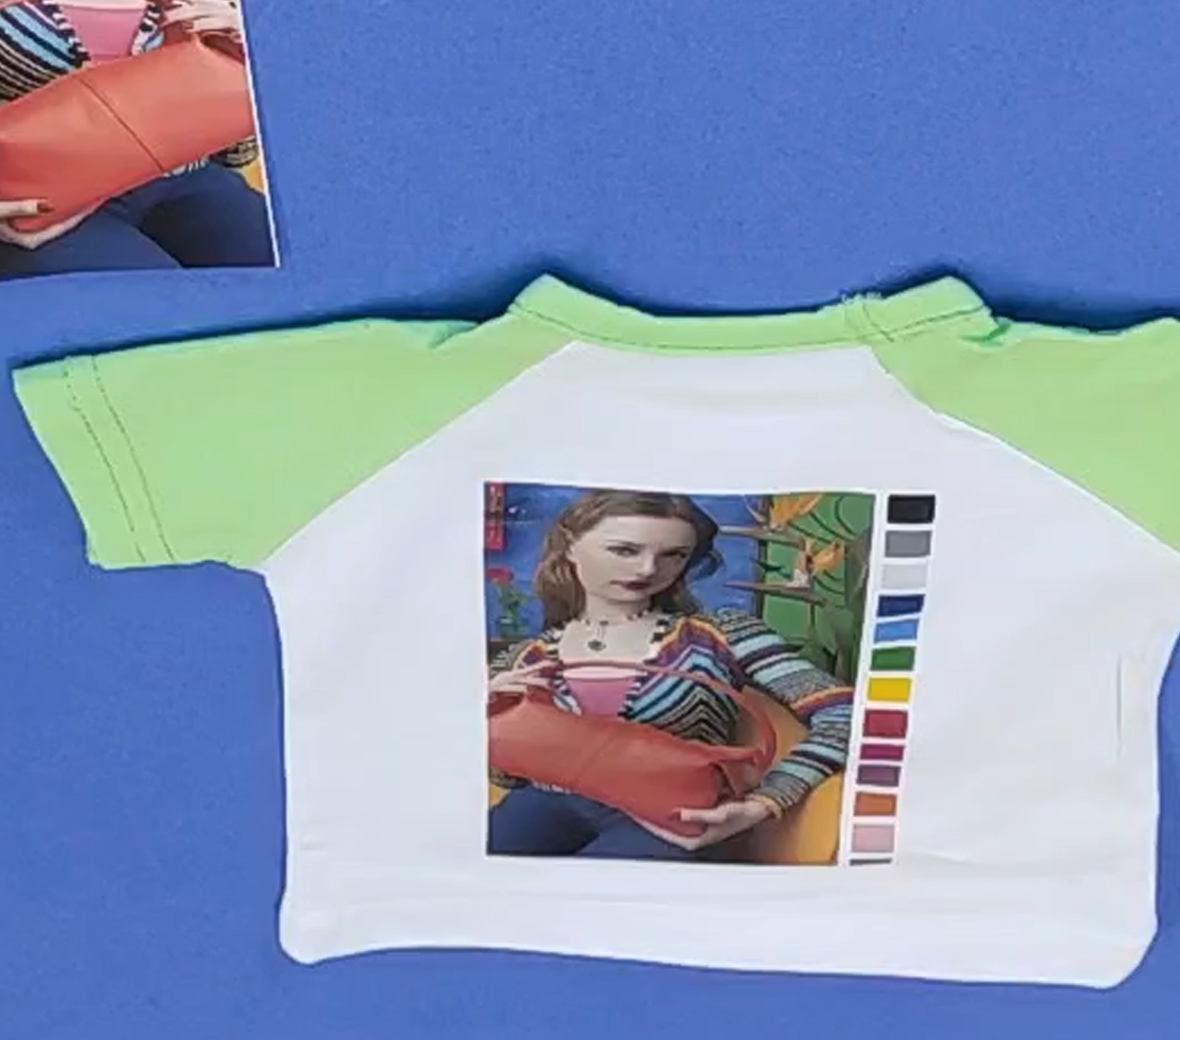 The Best Inkjet Heat Transfer Paper To Print photo images Shirts At Home With A Inkjet Printer